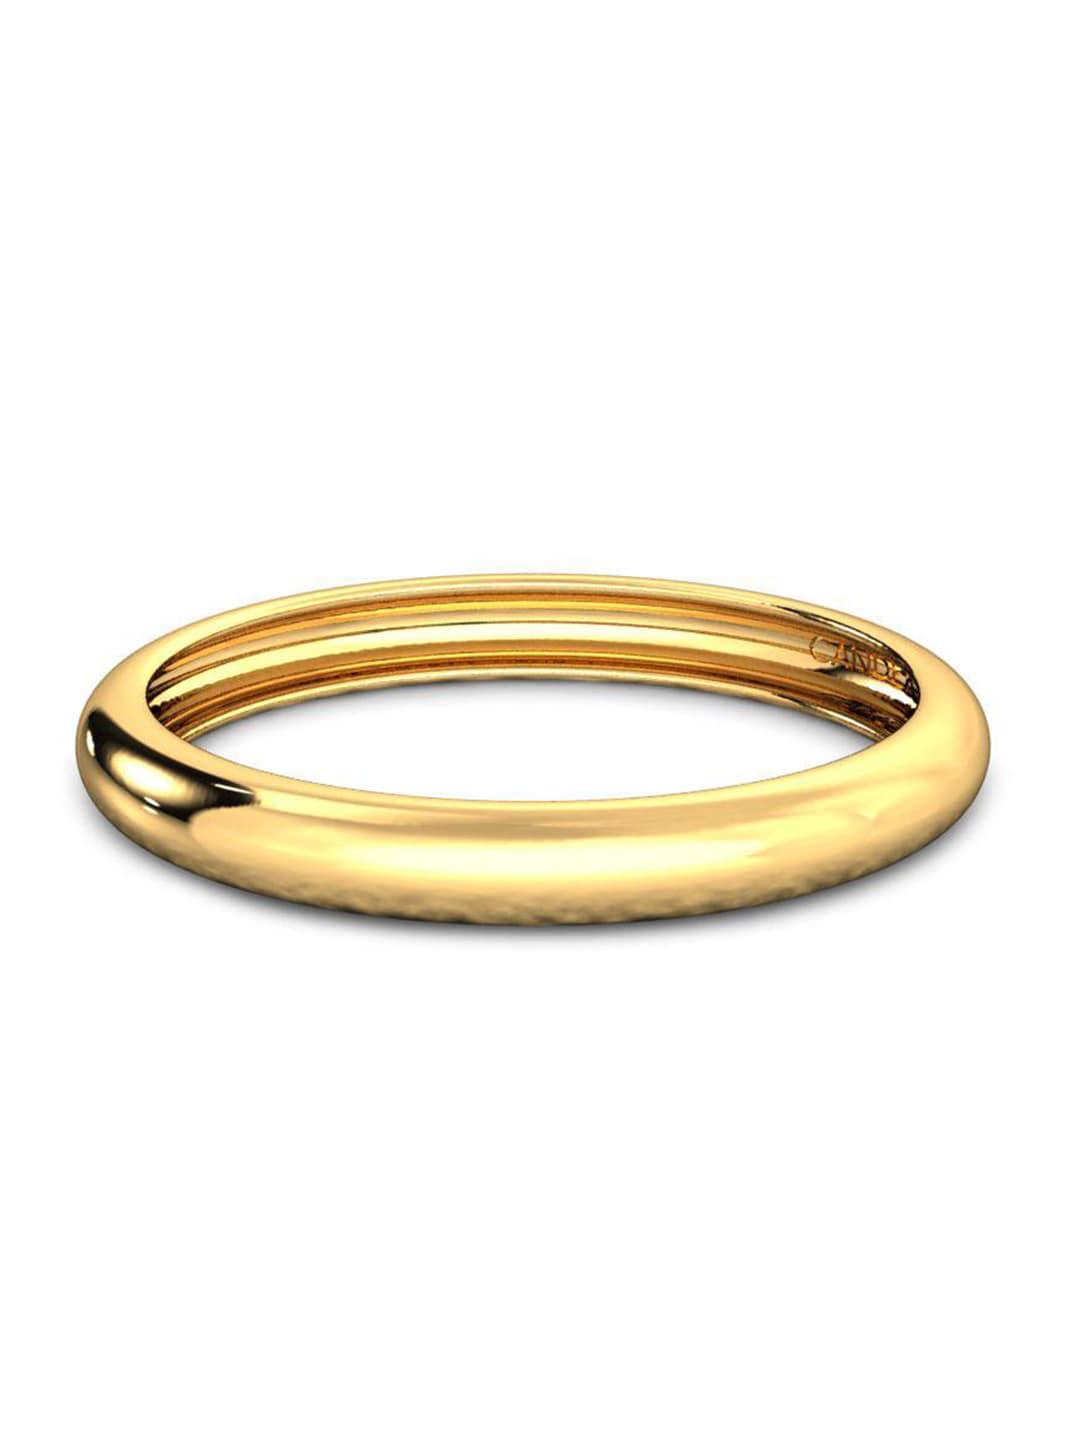 candere-a-kalyan-jewellers-company-18kt-gold-ring-1.46gm